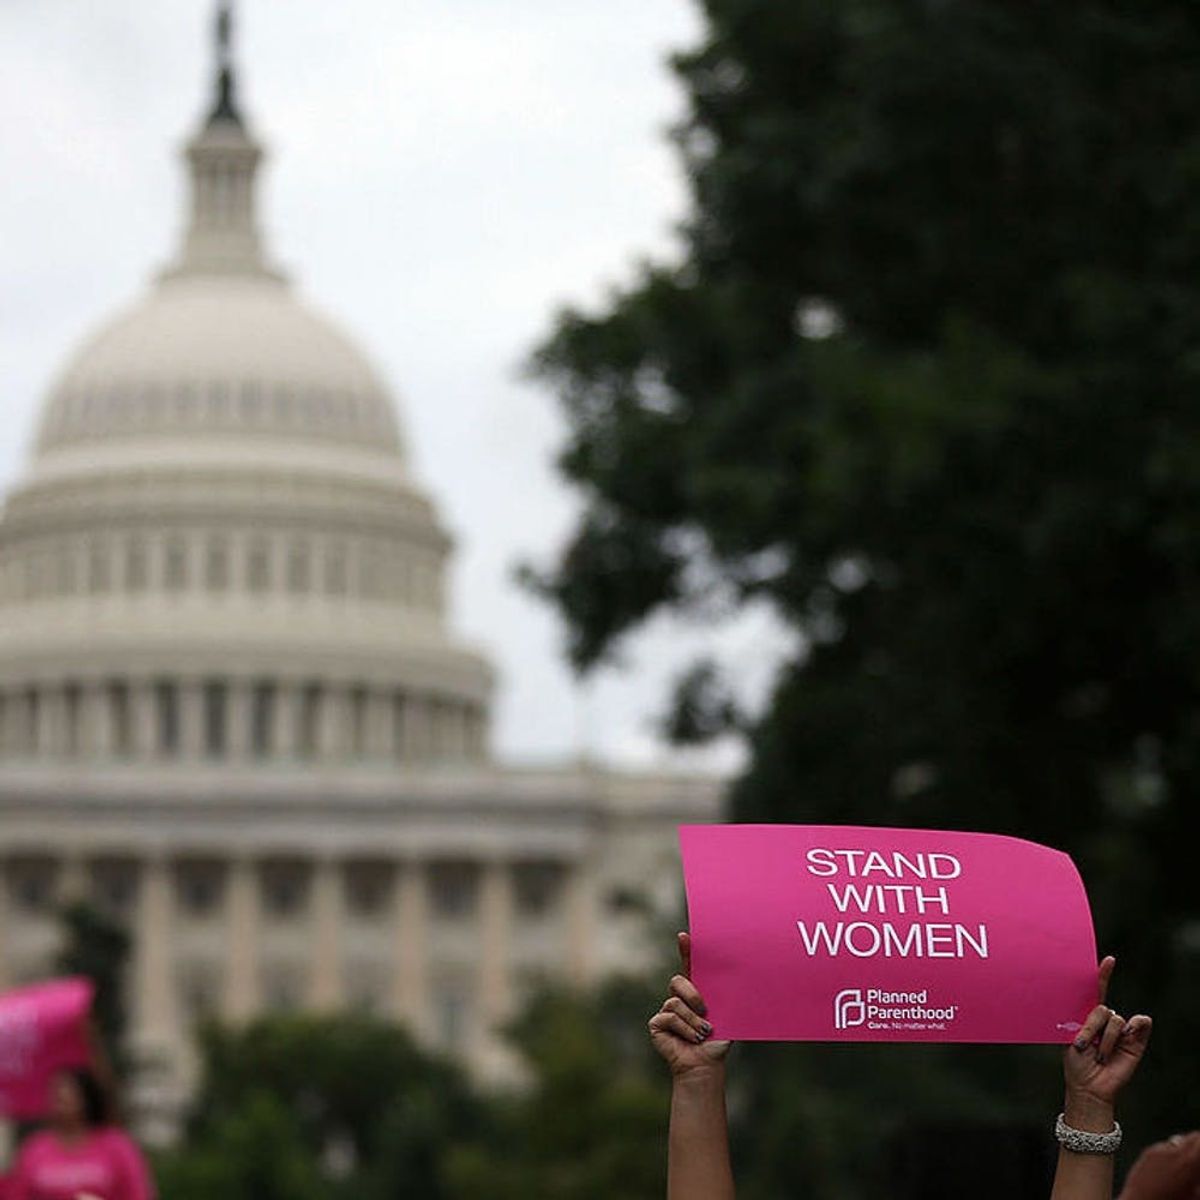 Washington DC Just Agreed to Make Birth Control Available Without a Doctor